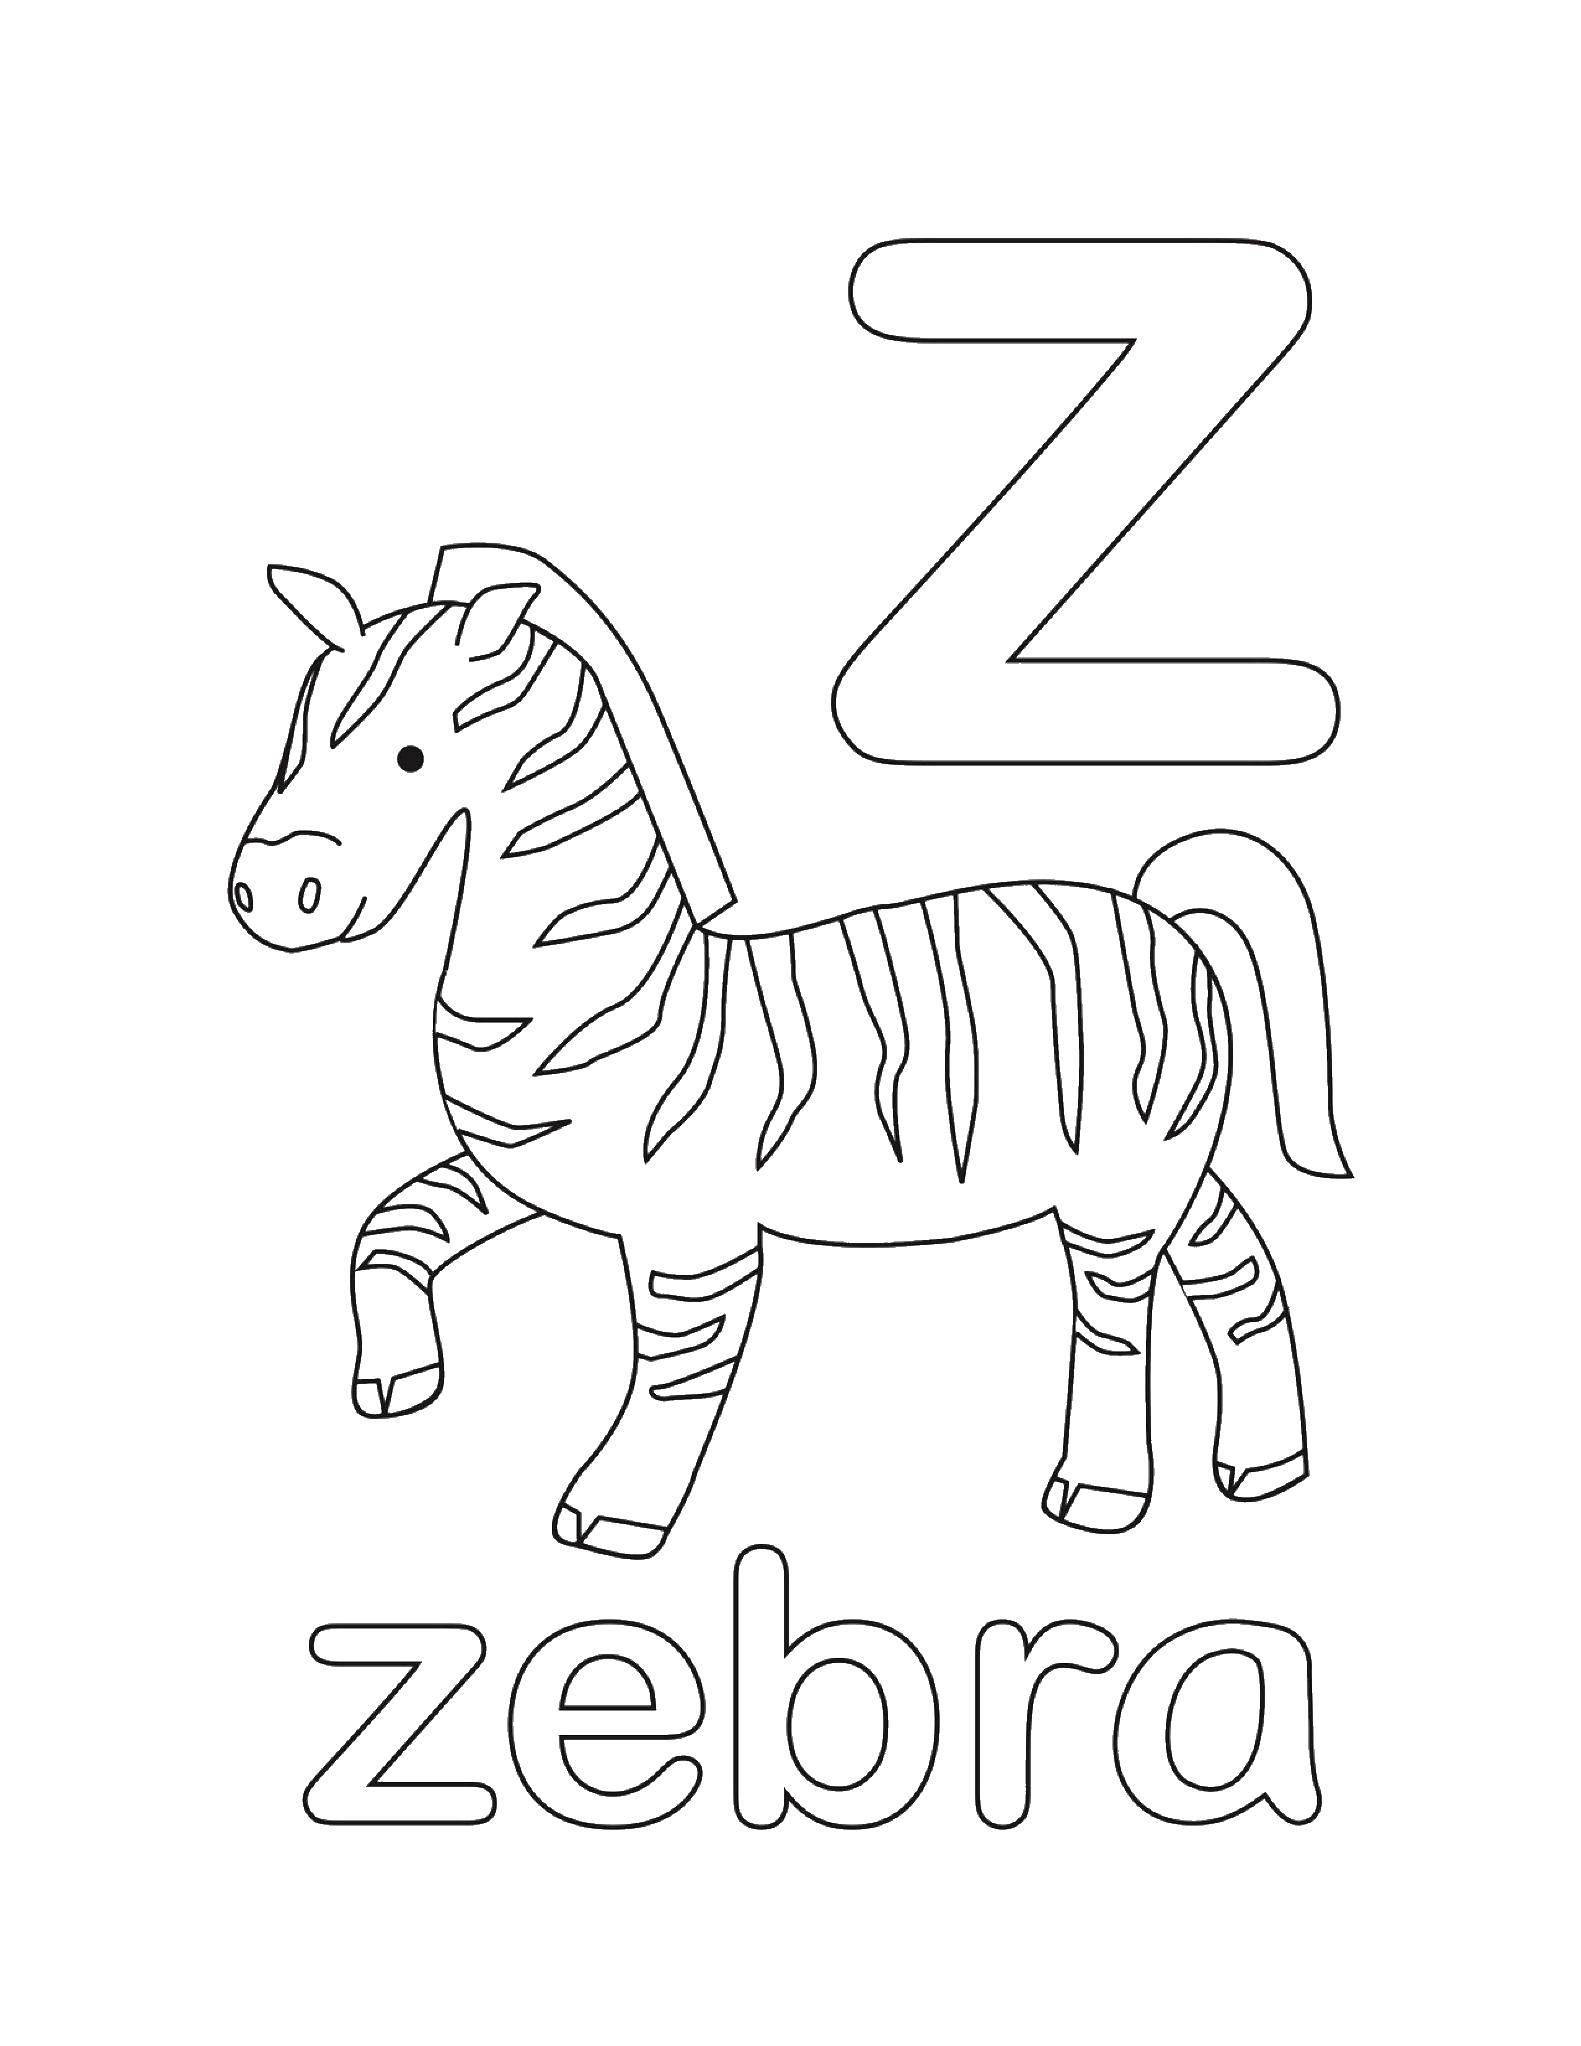 Coloring Z Zebra. Category English words. Tags:  English.